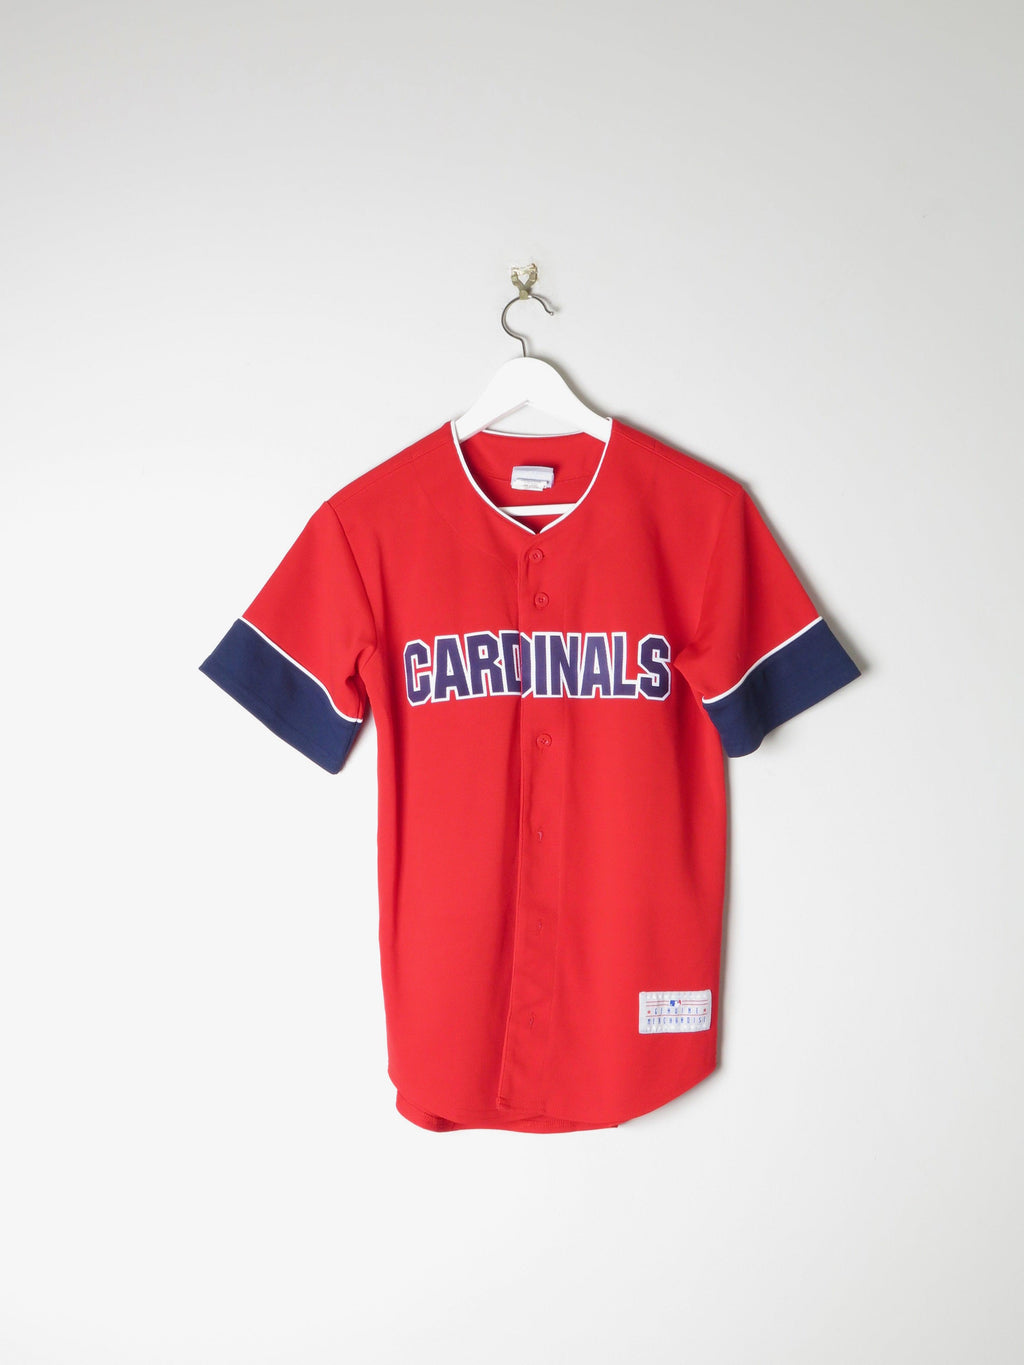 Women's Red Button Down St Louis Cardinals Jersey S - The Harlequin